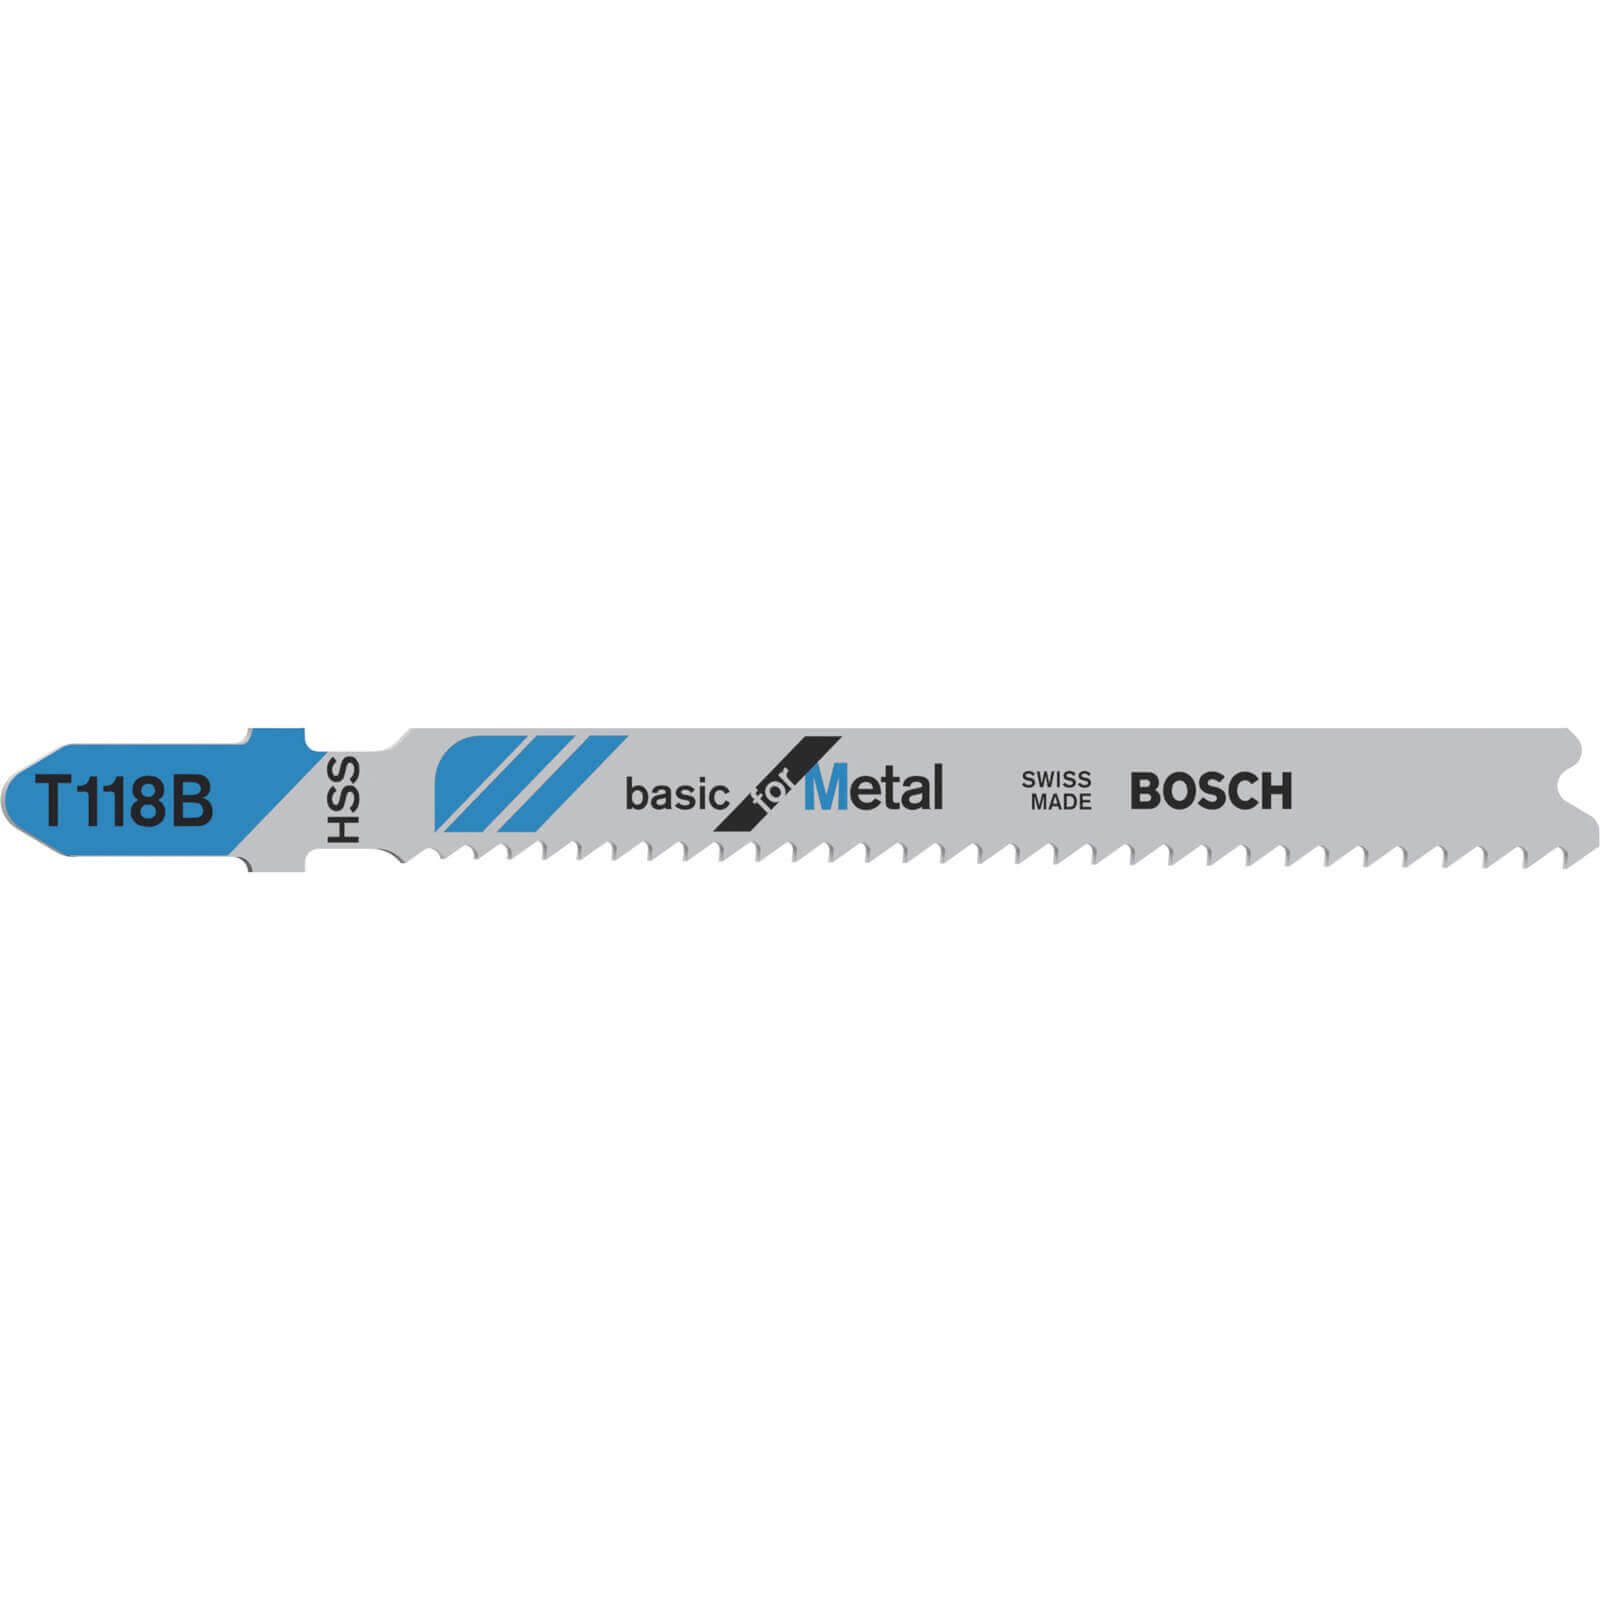 Image of Bosch T118 B Metal Cutting Jigsaw Blades Pack of 5